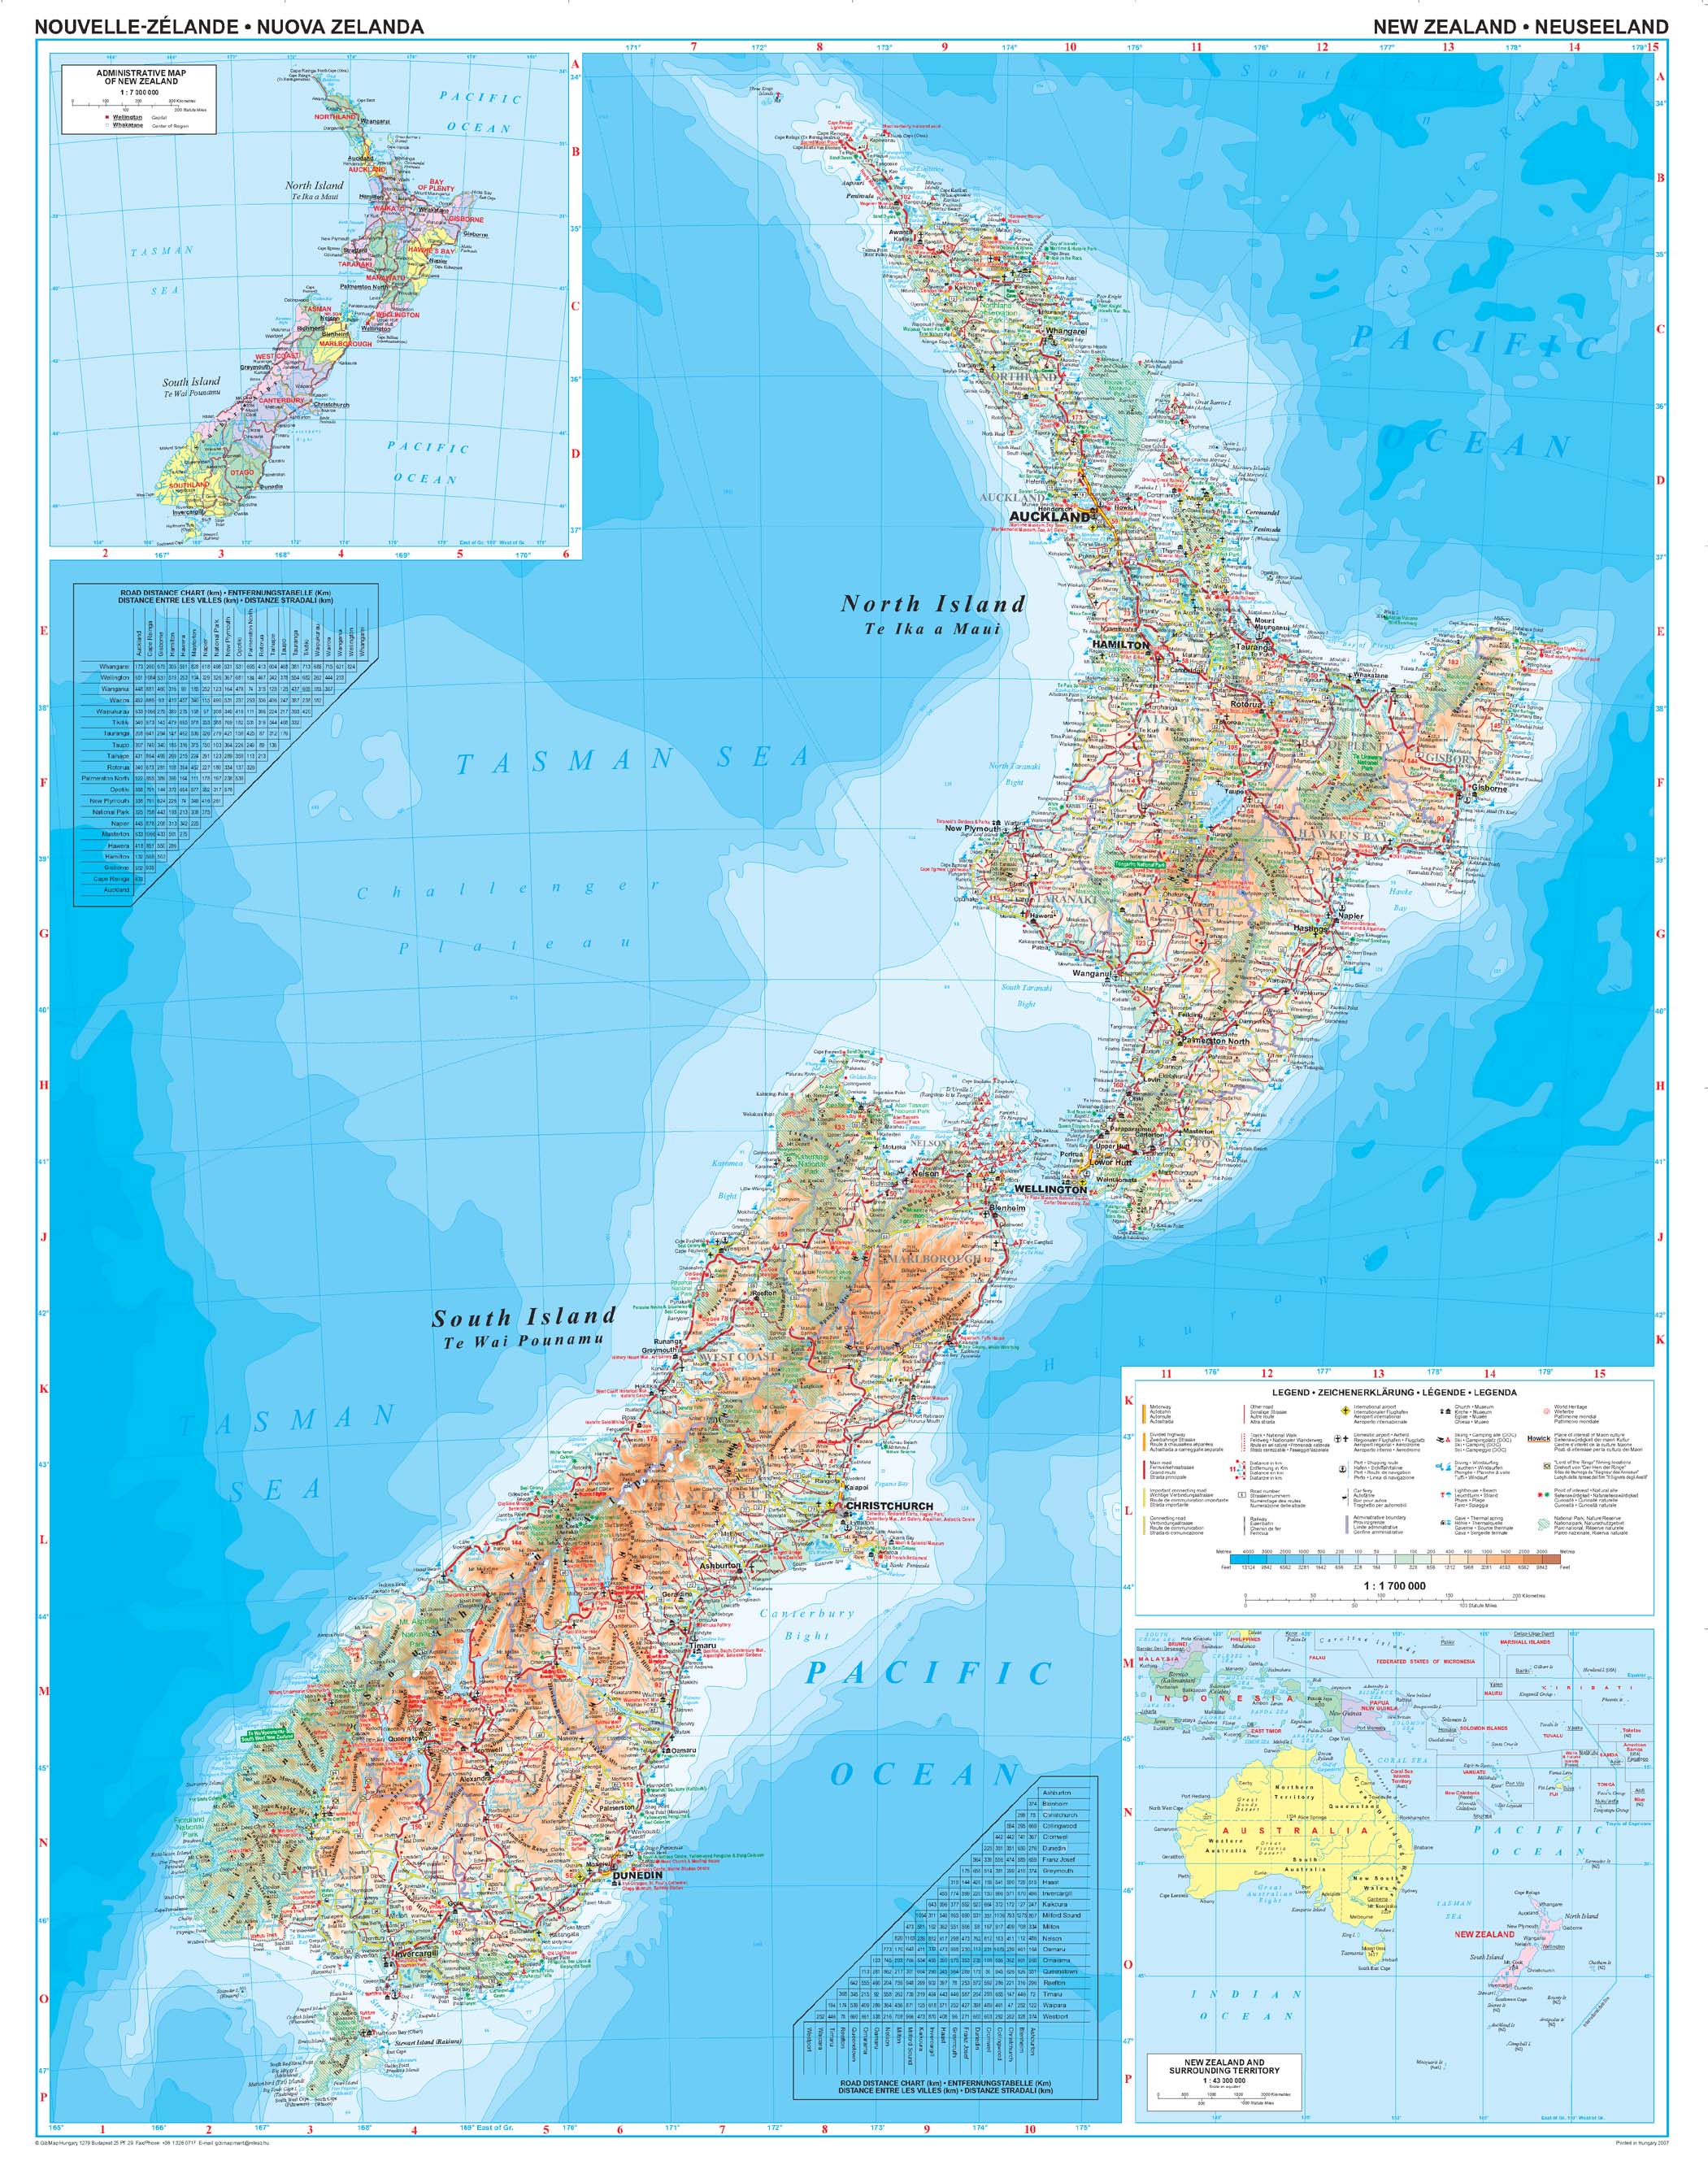 New Zealand overview map